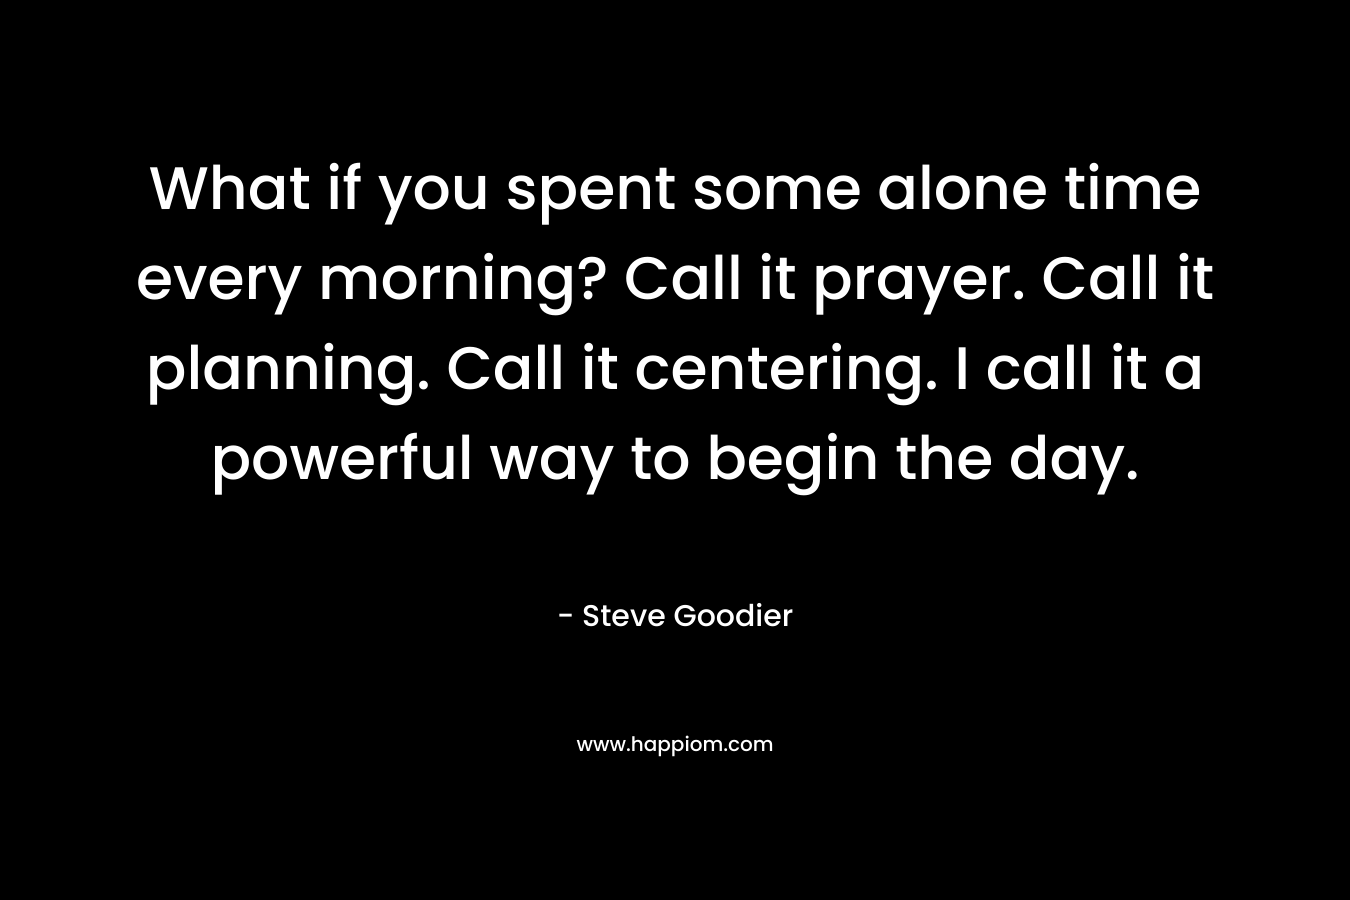 What if you spent some alone time every morning? Call it prayer. Call it planning. Call it centering. I call it a powerful way to begin the day.